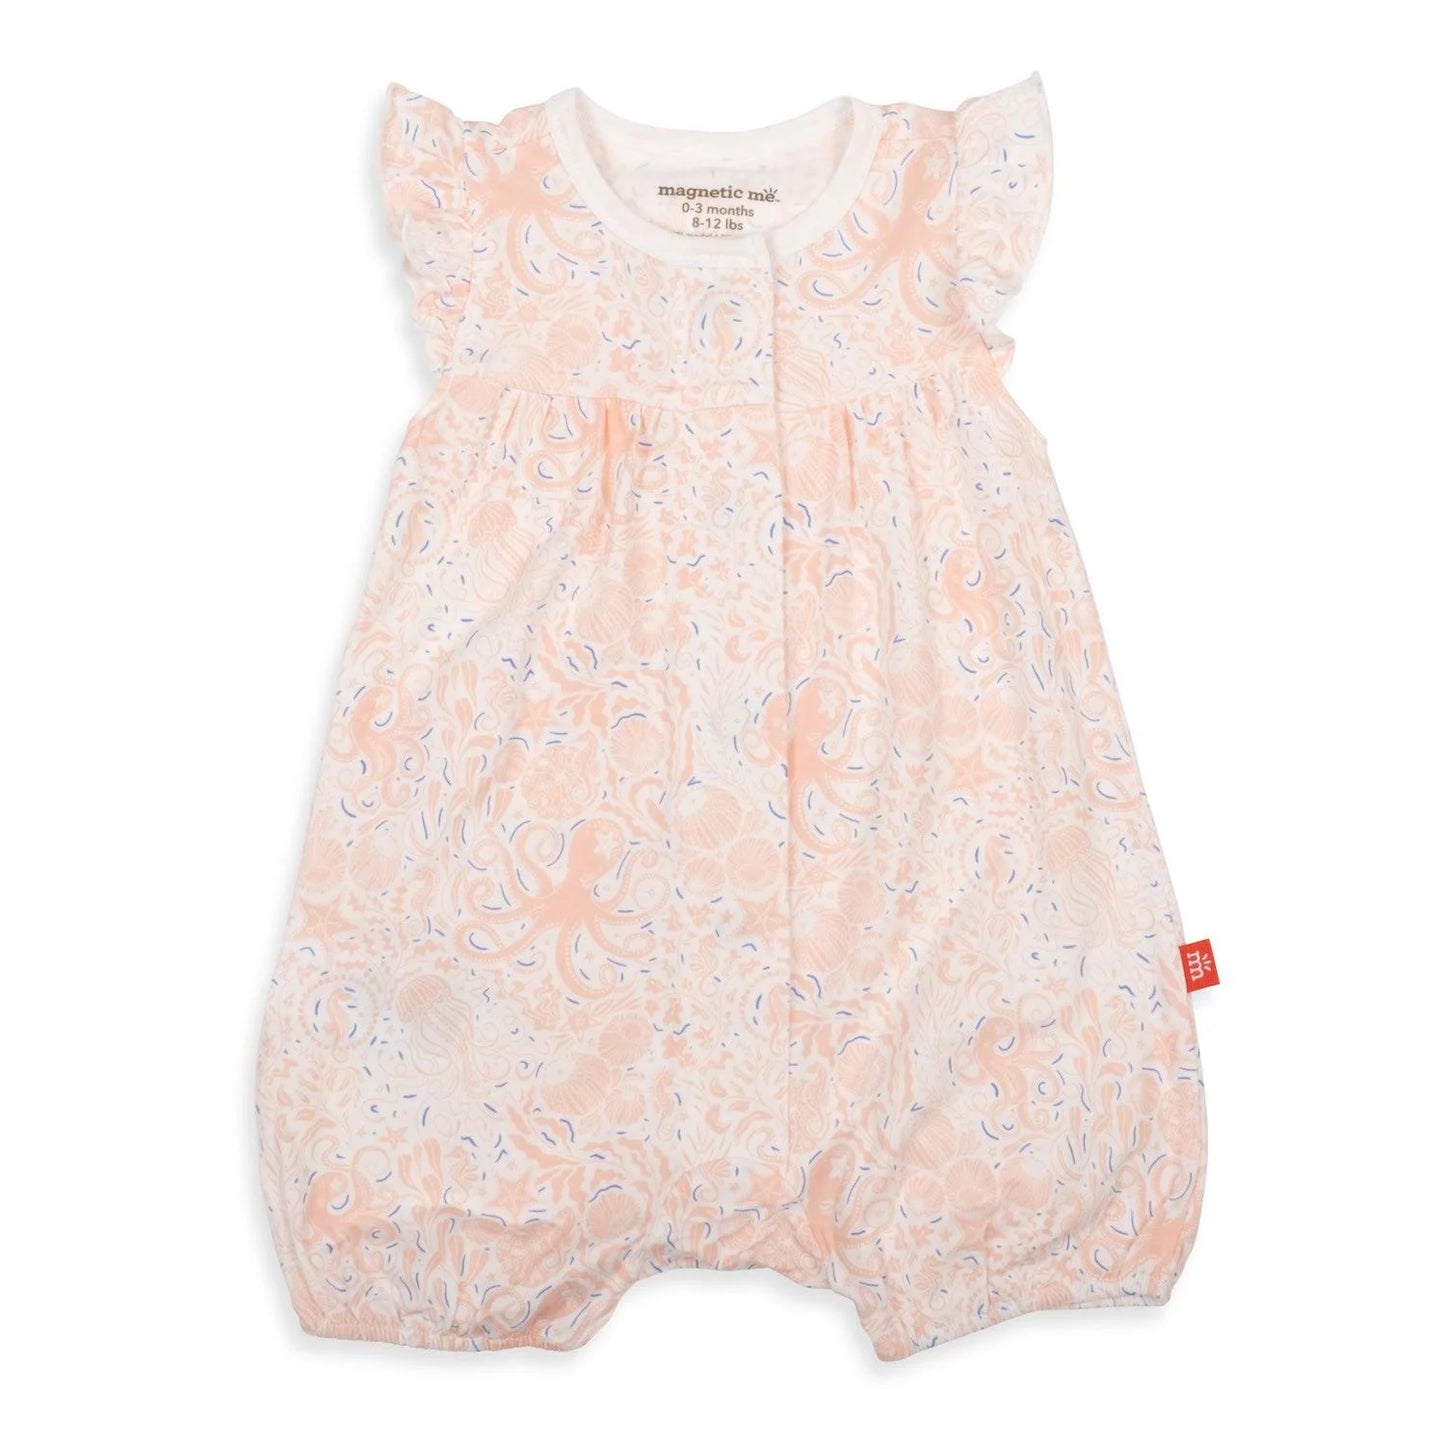 Last One - 6/9 Months: Tank Romper (Magnetic) - Seas the Day Pink Ruffles